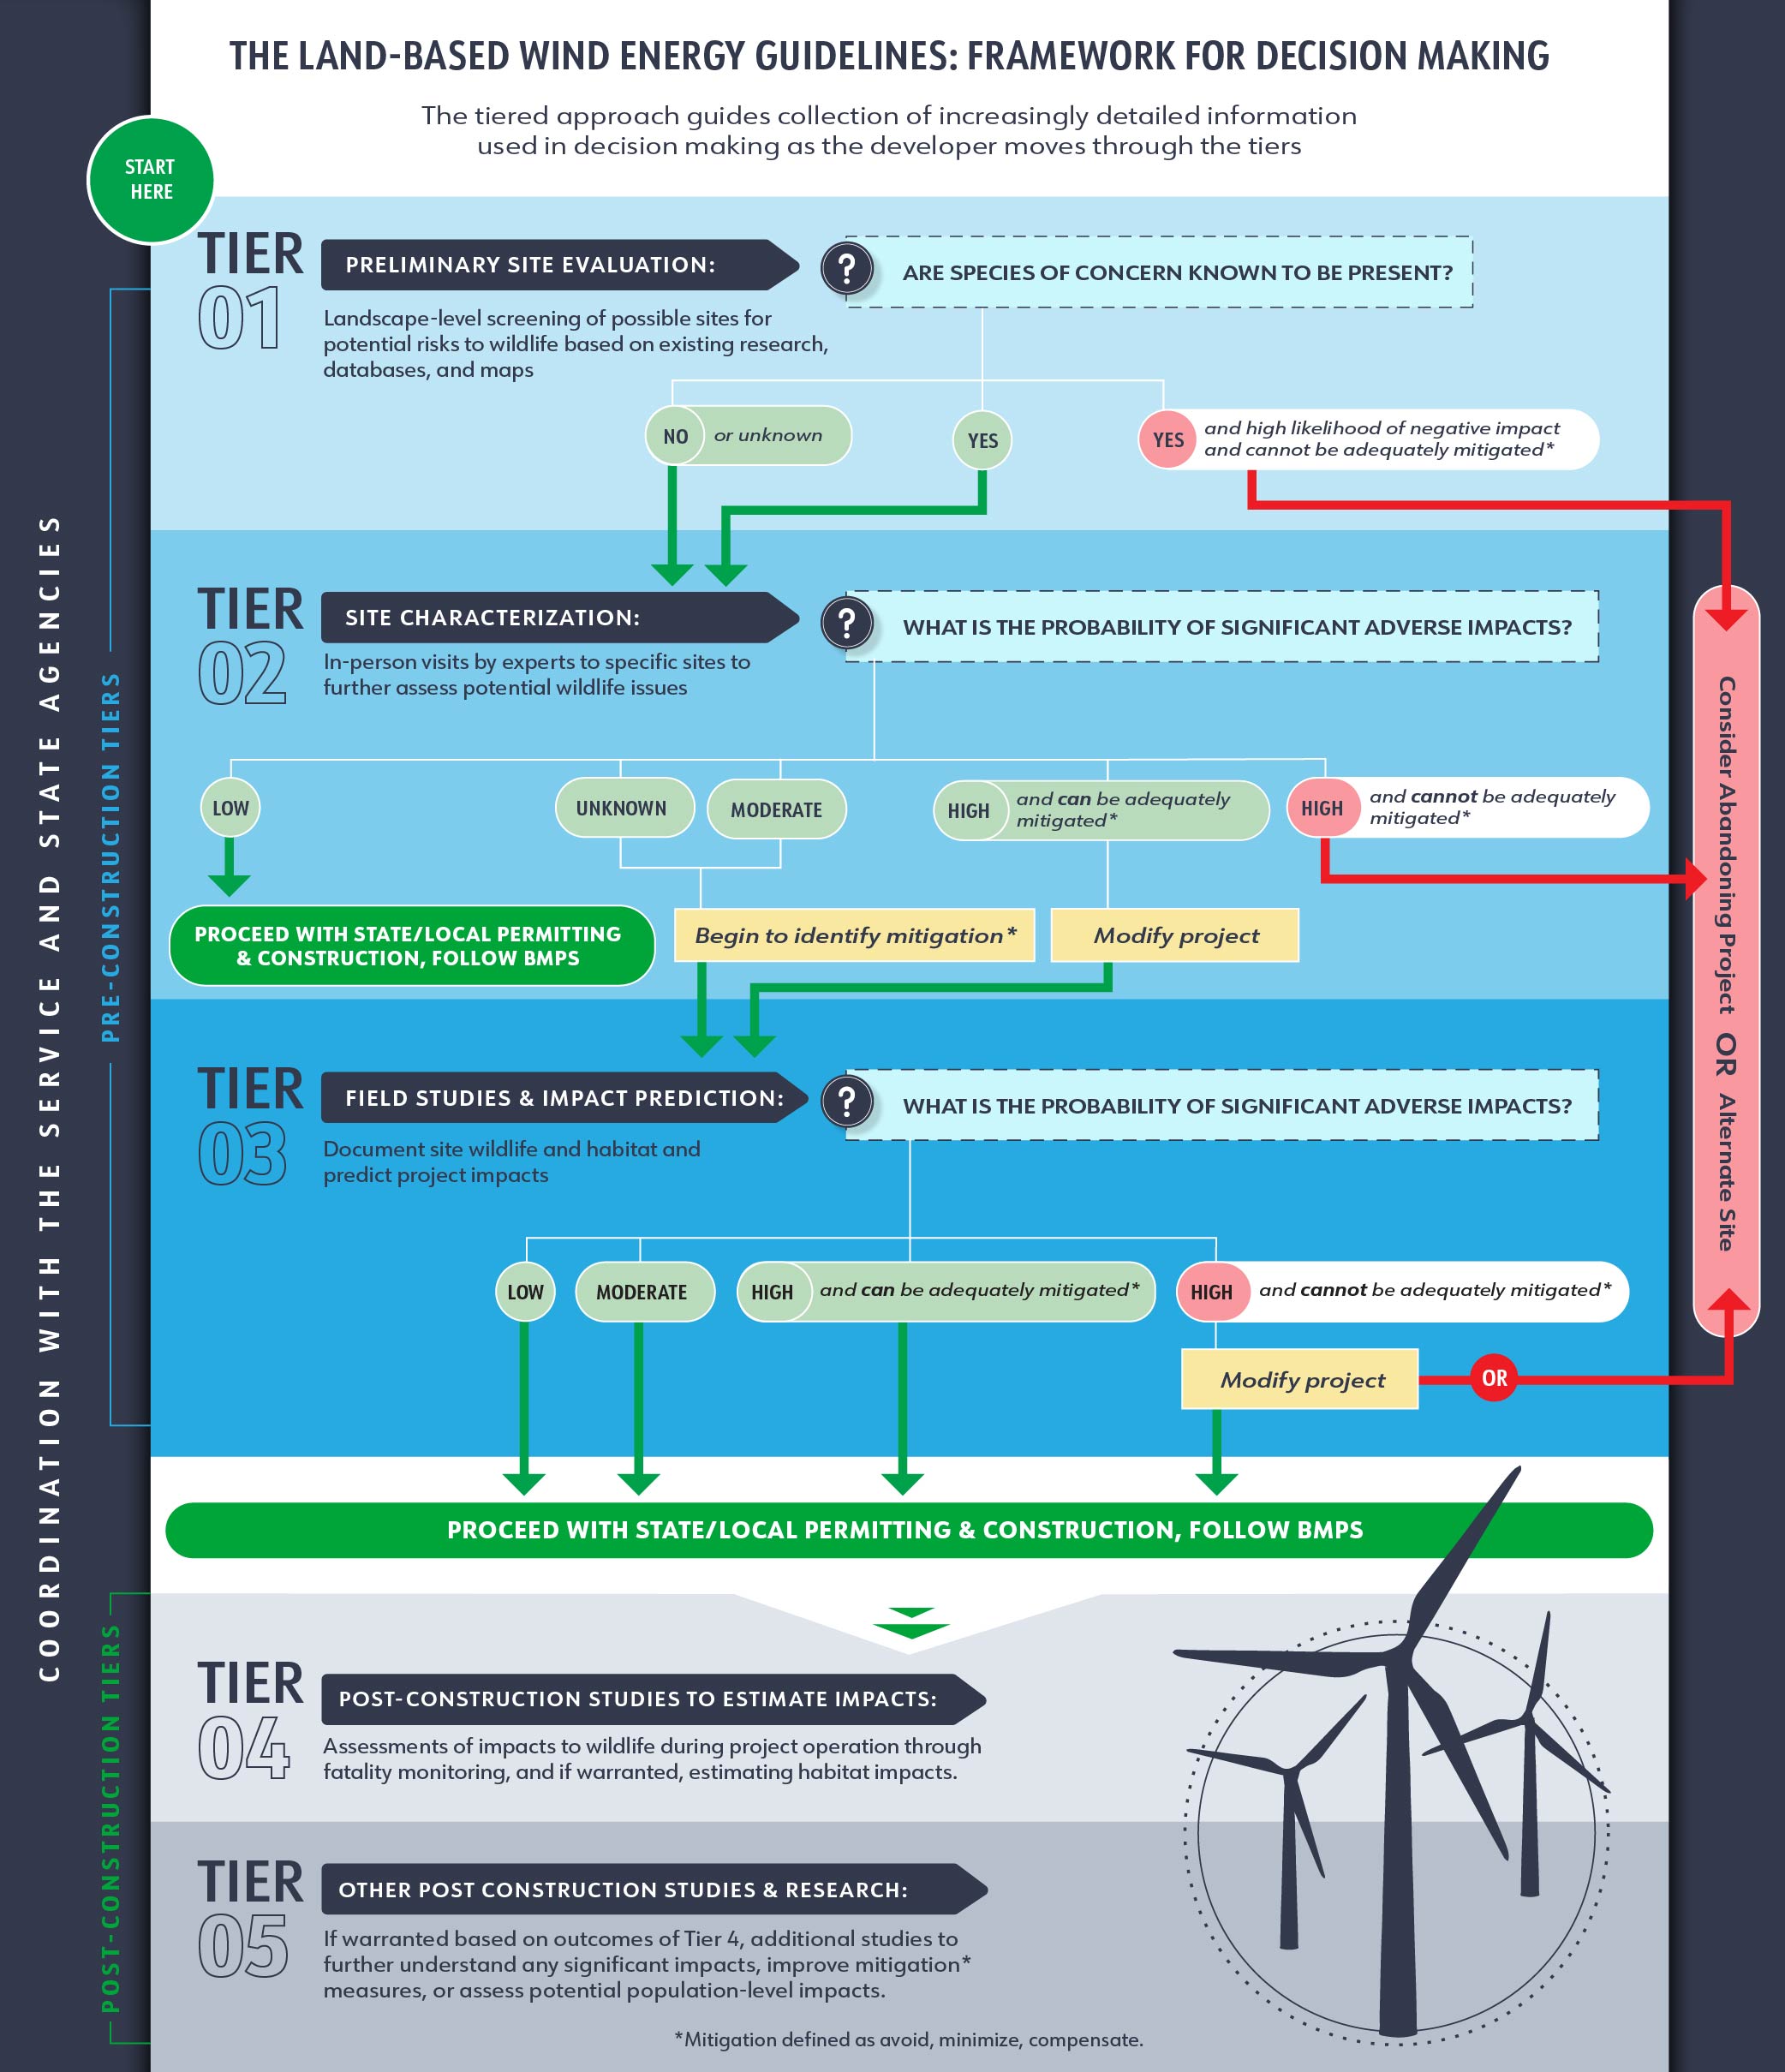 The Land-based Wind Energy Guidelines: Framework for Decision Making - Infographic by AWWI